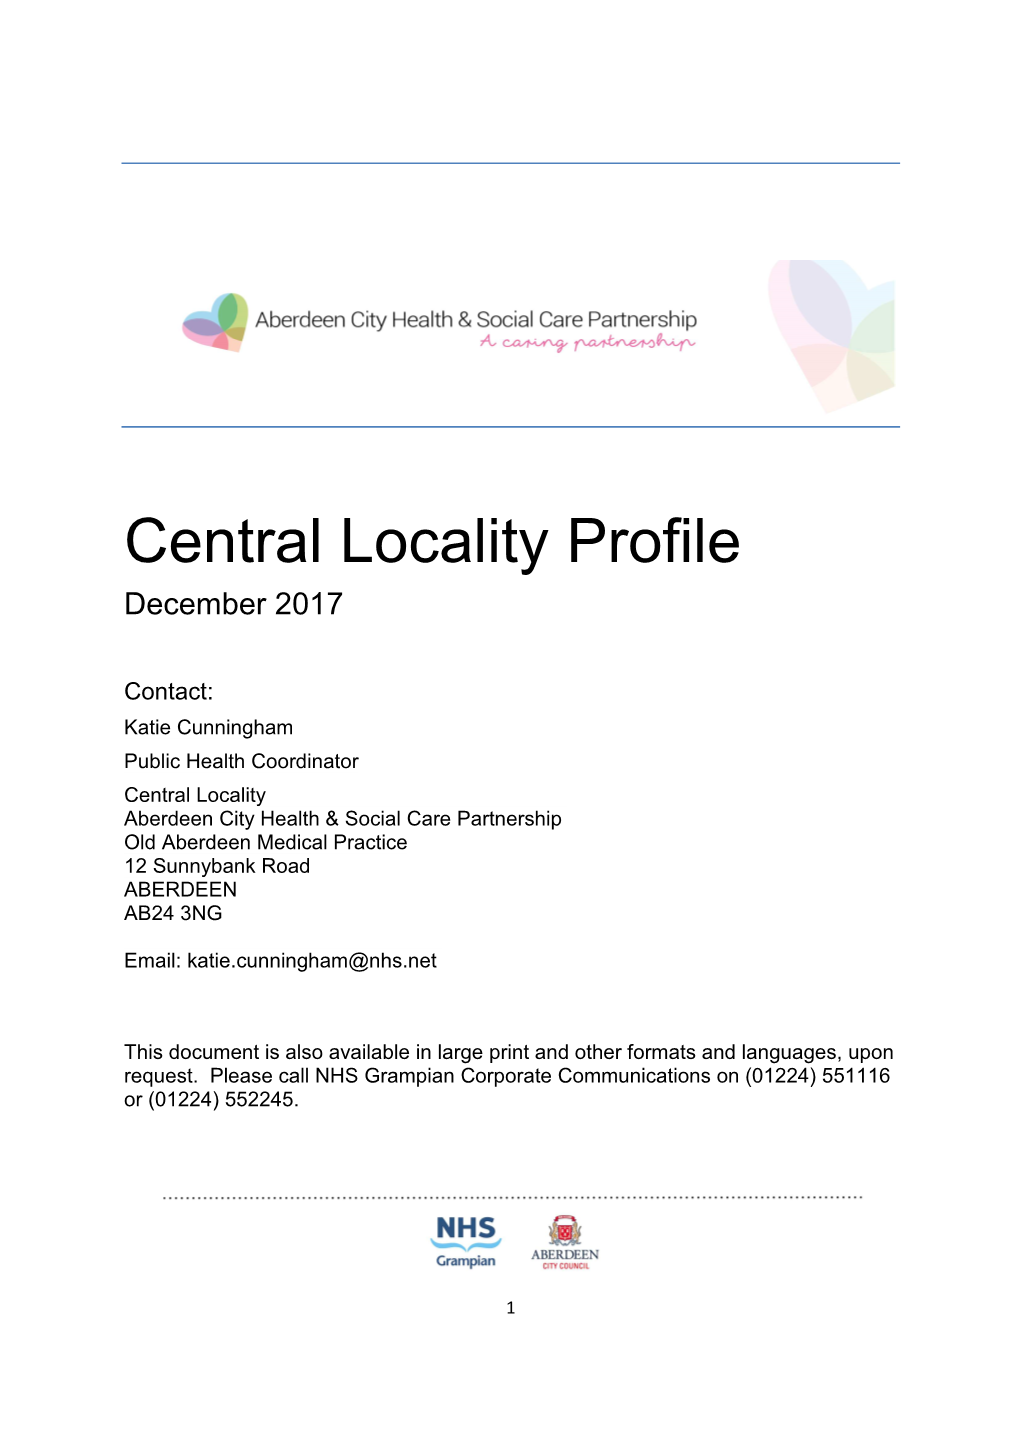 Central Locality Profile December 2017